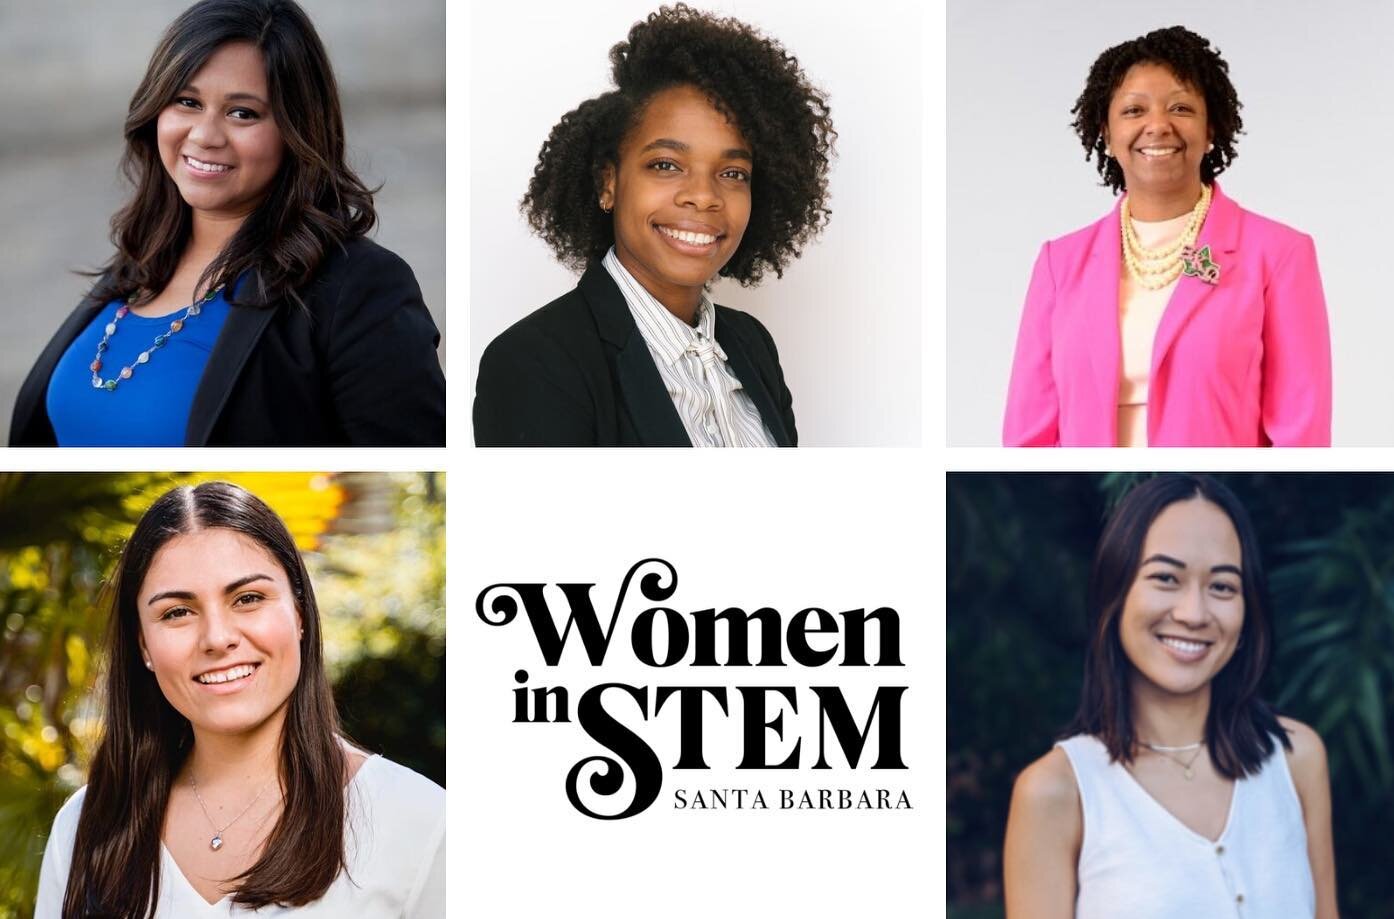 This Thursday!!! Careers in the Time of COVID virtual panel, Oct 8th at 6pm. RSVP at link in bio and get ready to connect and learn 😷🤓
Moderator: Eloisa Chavez (SBWiSTEM, SEE Intl) 👩&zwj;⚖️
Panelists: 
Nikia Acy (HOKA ONE ONE) 👩&zwj;💻
Latrece Se